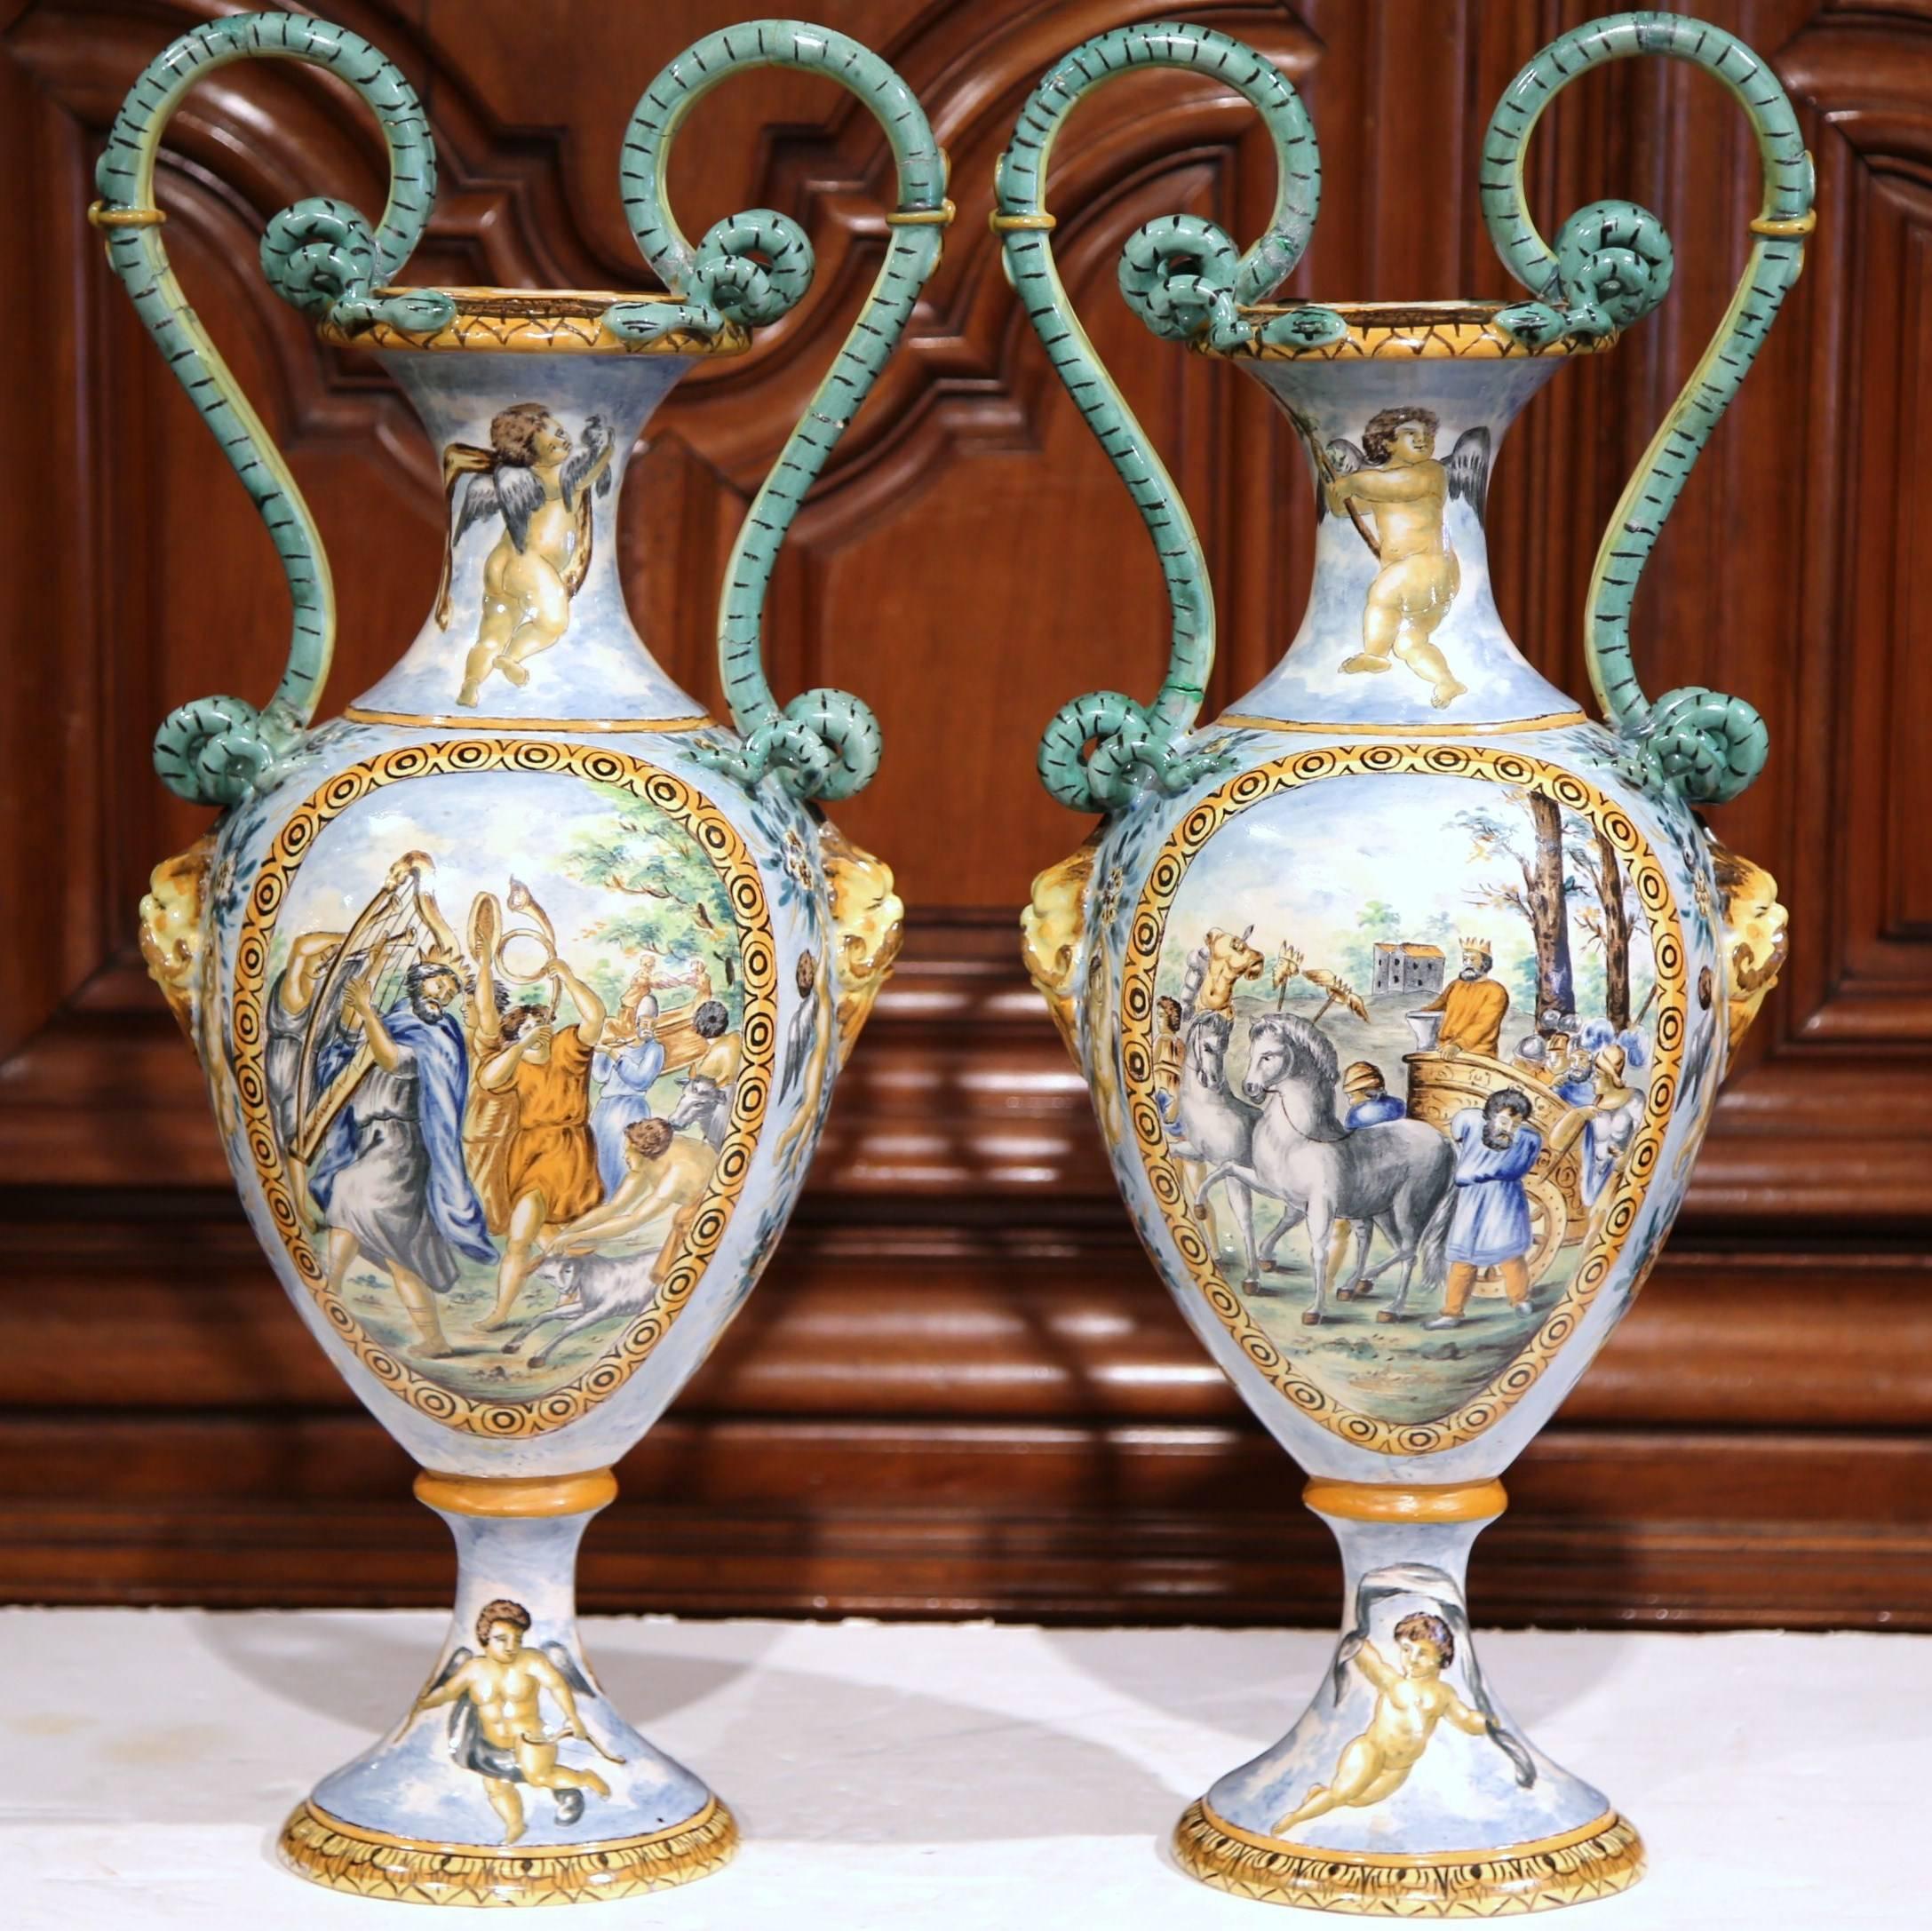 Hand-Crafted Pair of 19th Century Italian Hand Classical Painted Vases with Roman Scenes